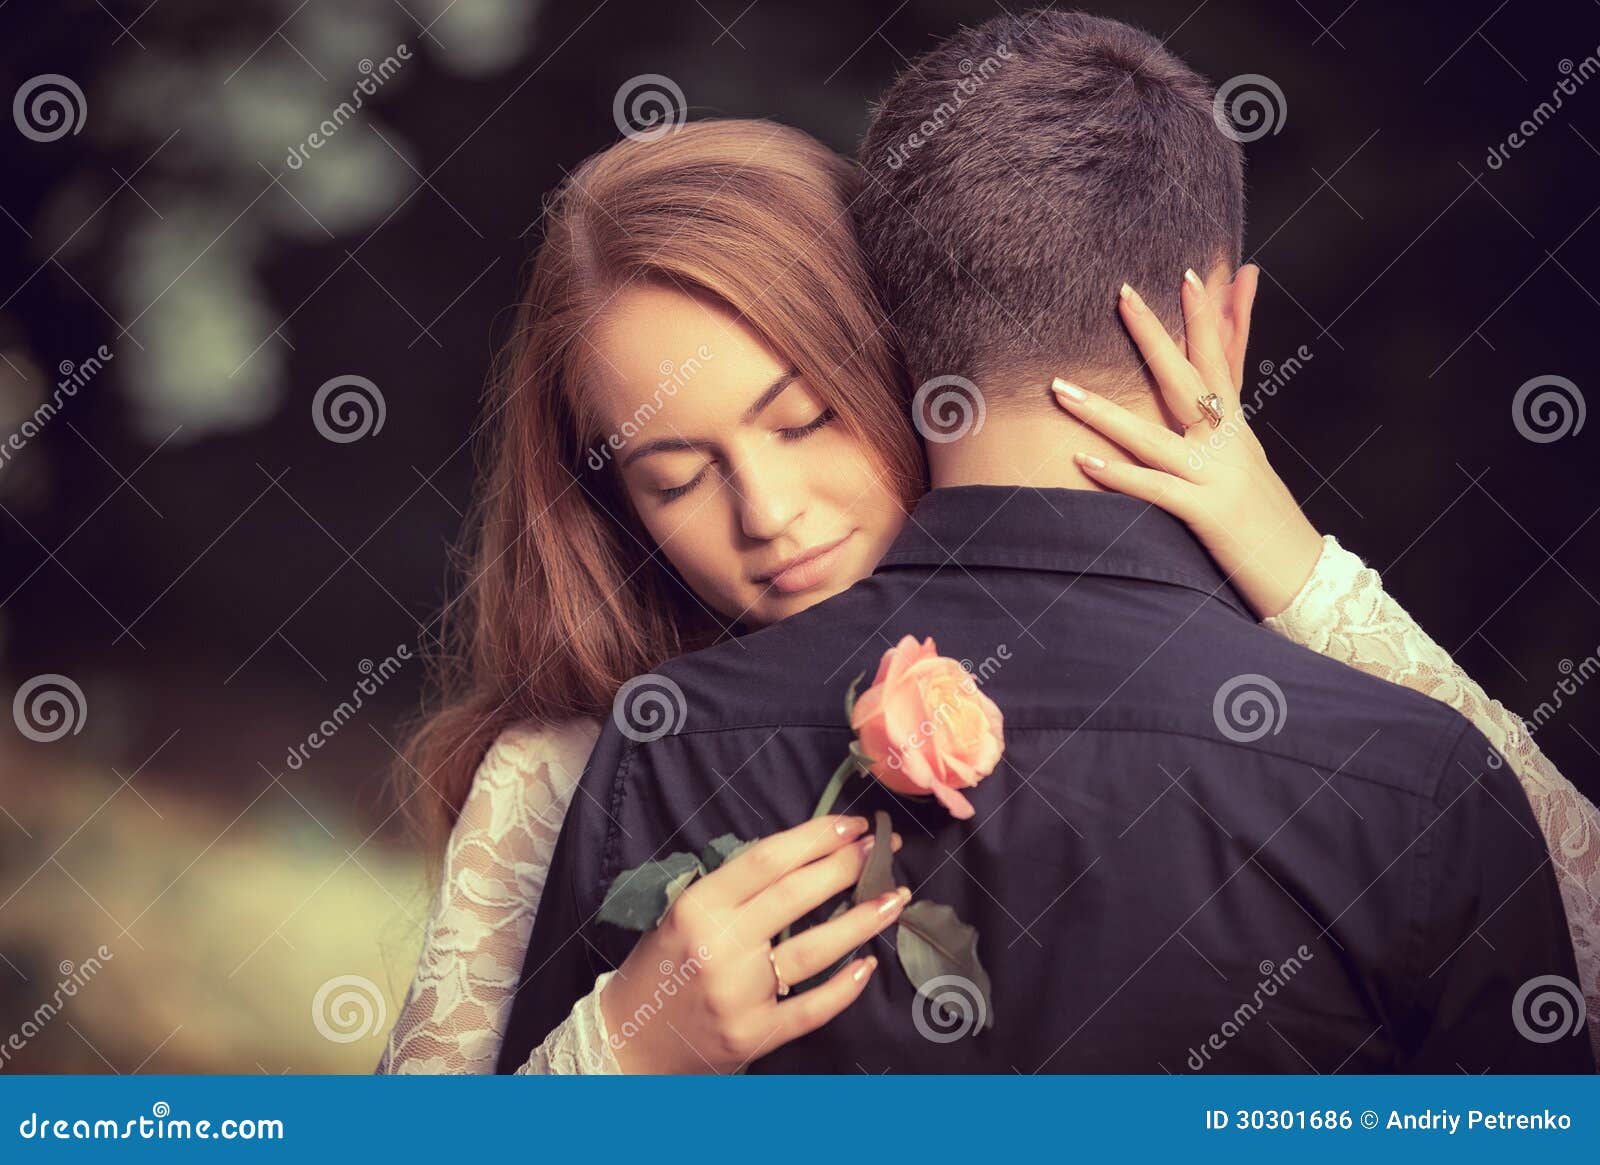 love and affection between a young couple